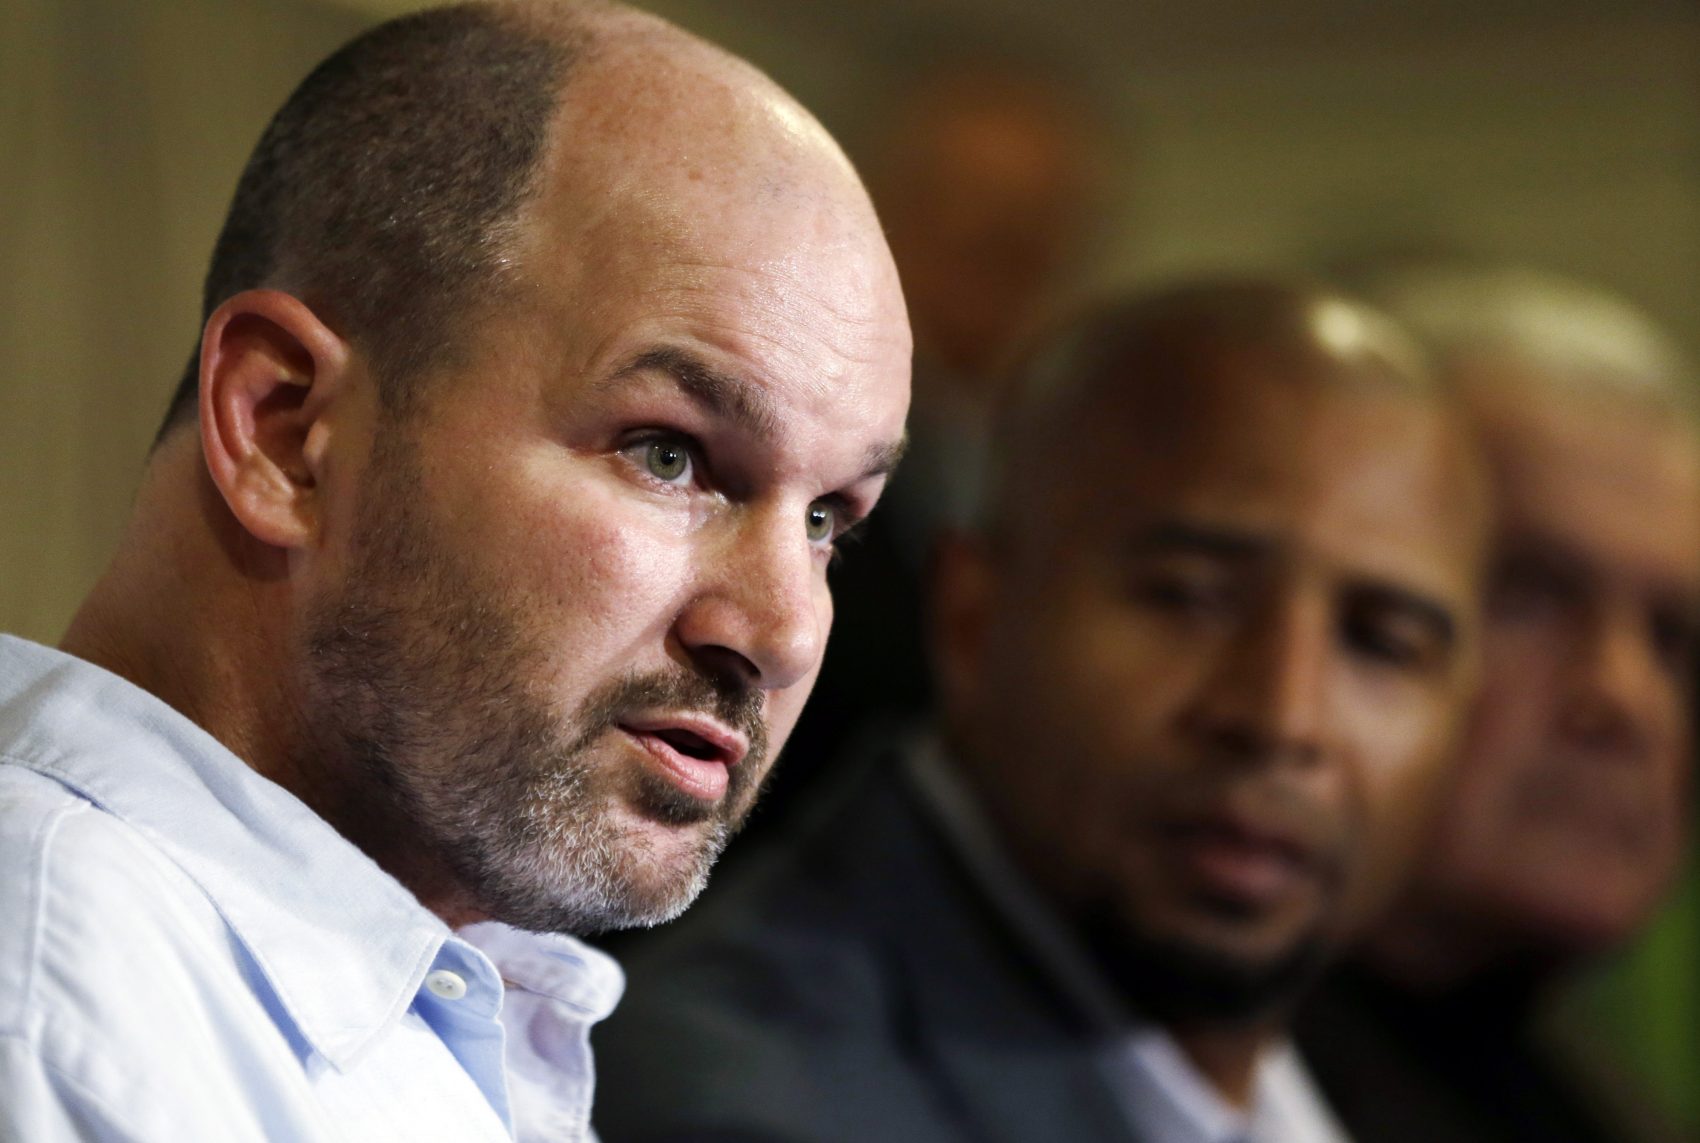 Former NFL player Kevin Turner, left, is seen in this 2013 file photo. Turner died earlier this year. (Matt Rourke/AP)